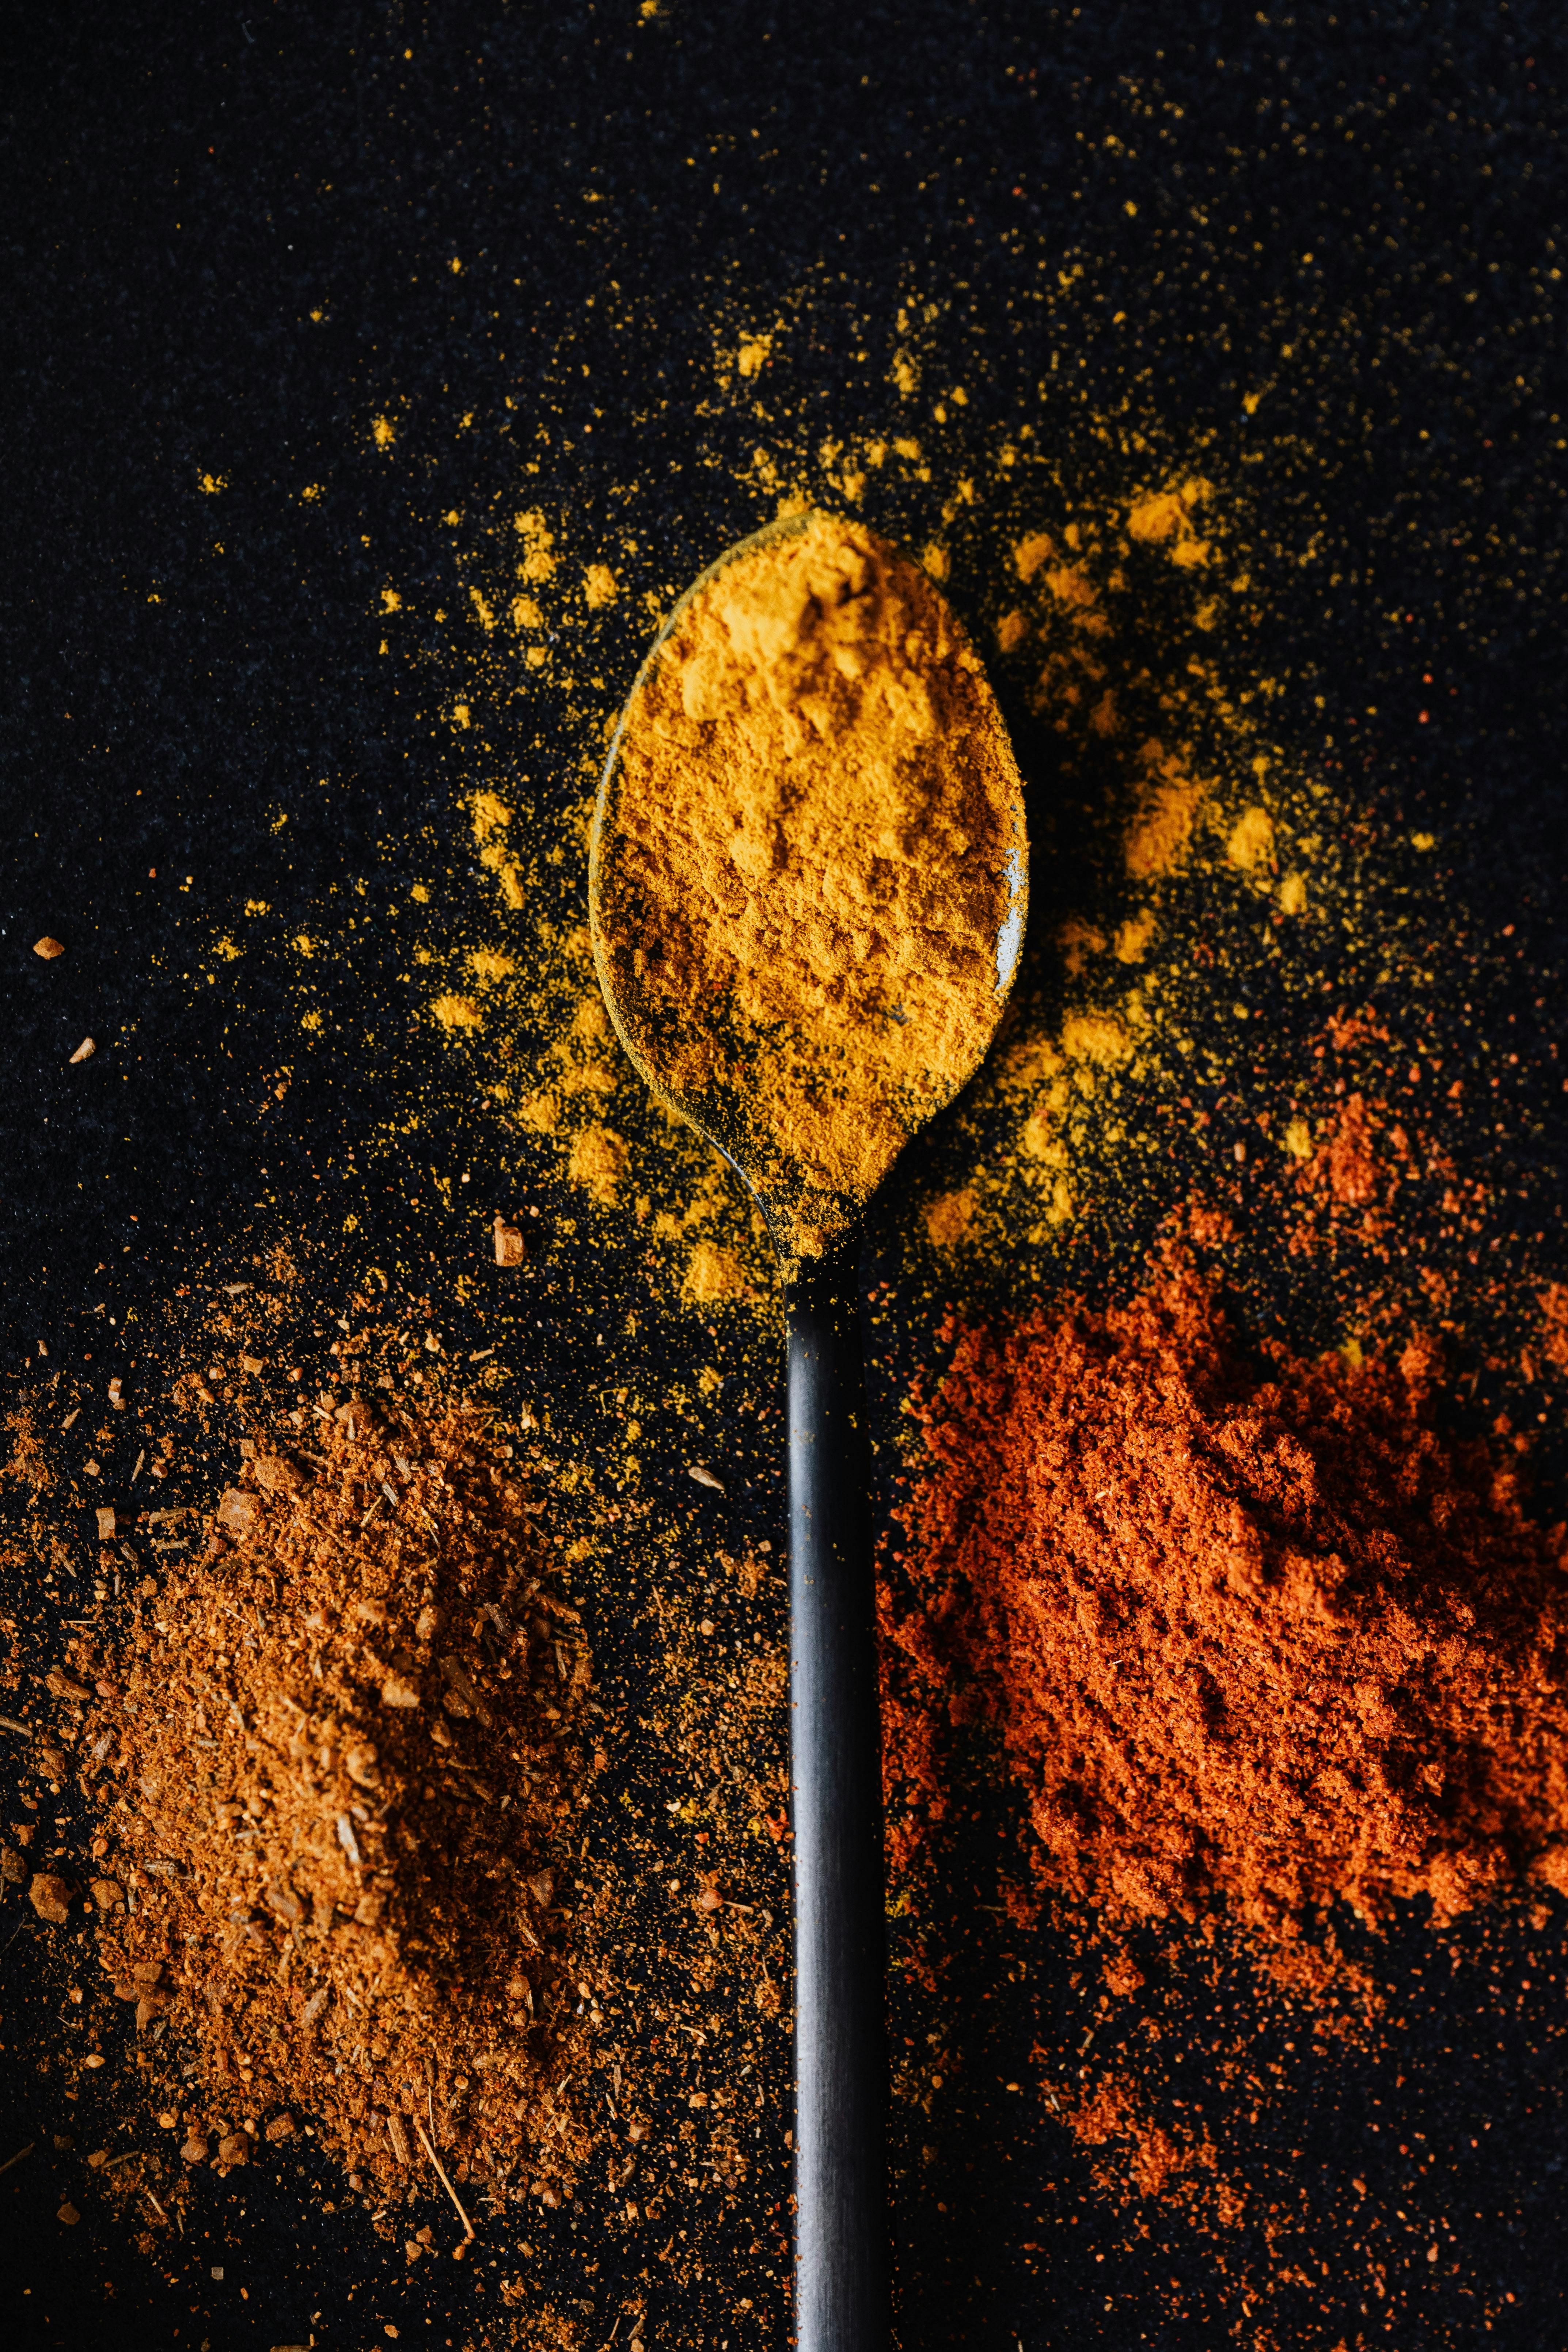 Spice Up Your Day with a Golden Turmeric Shot